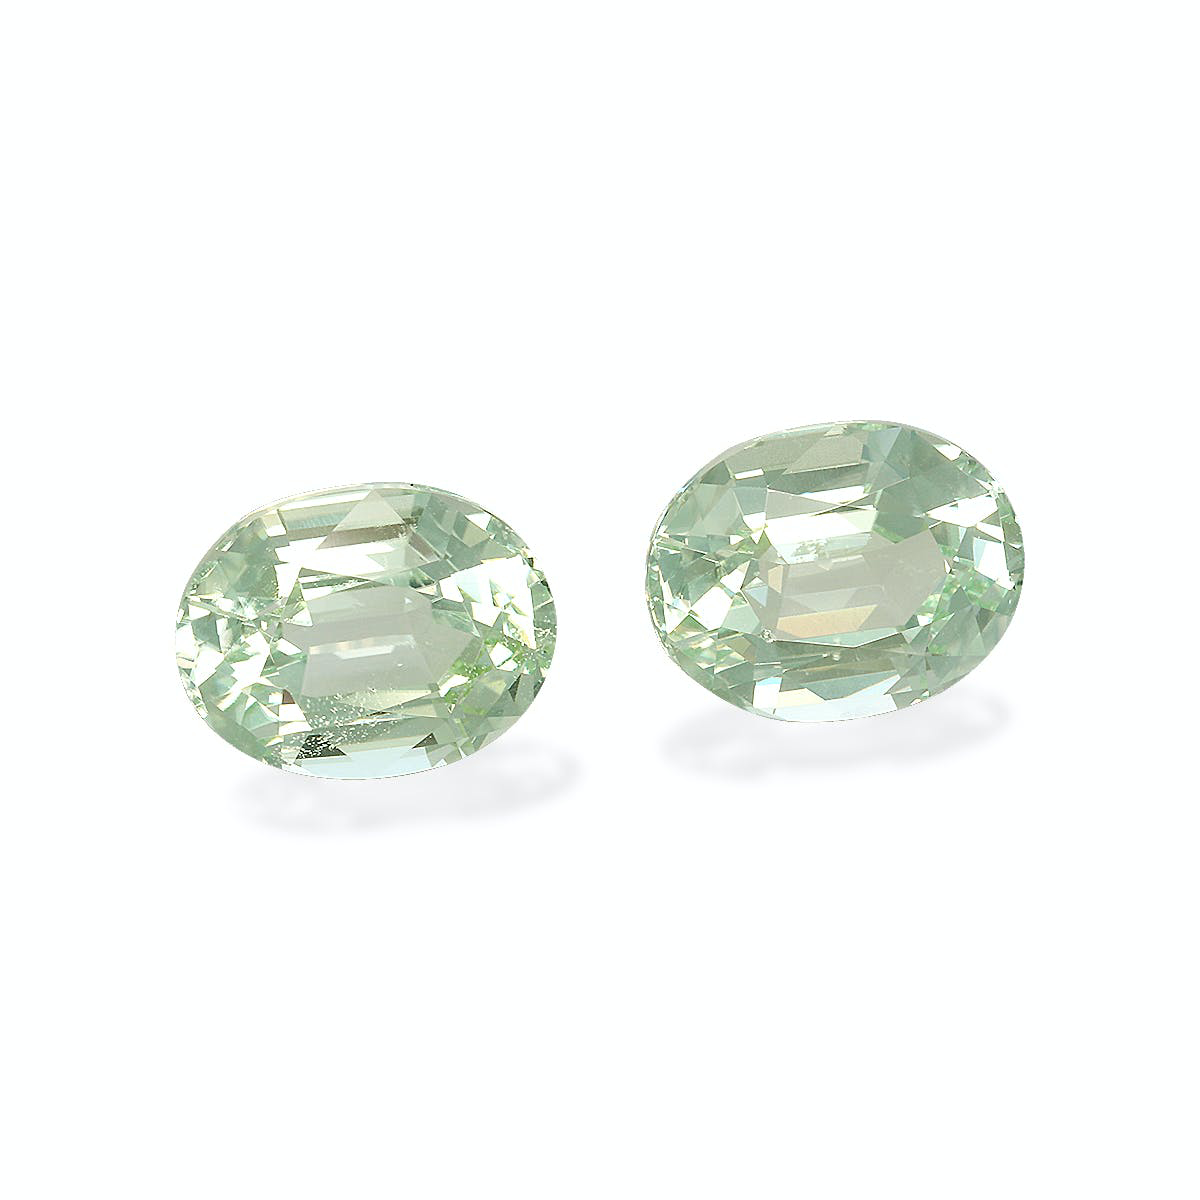 Picture of Mist Green Tourmaline 8.19ct - 11x9mm Pair (TG1544)